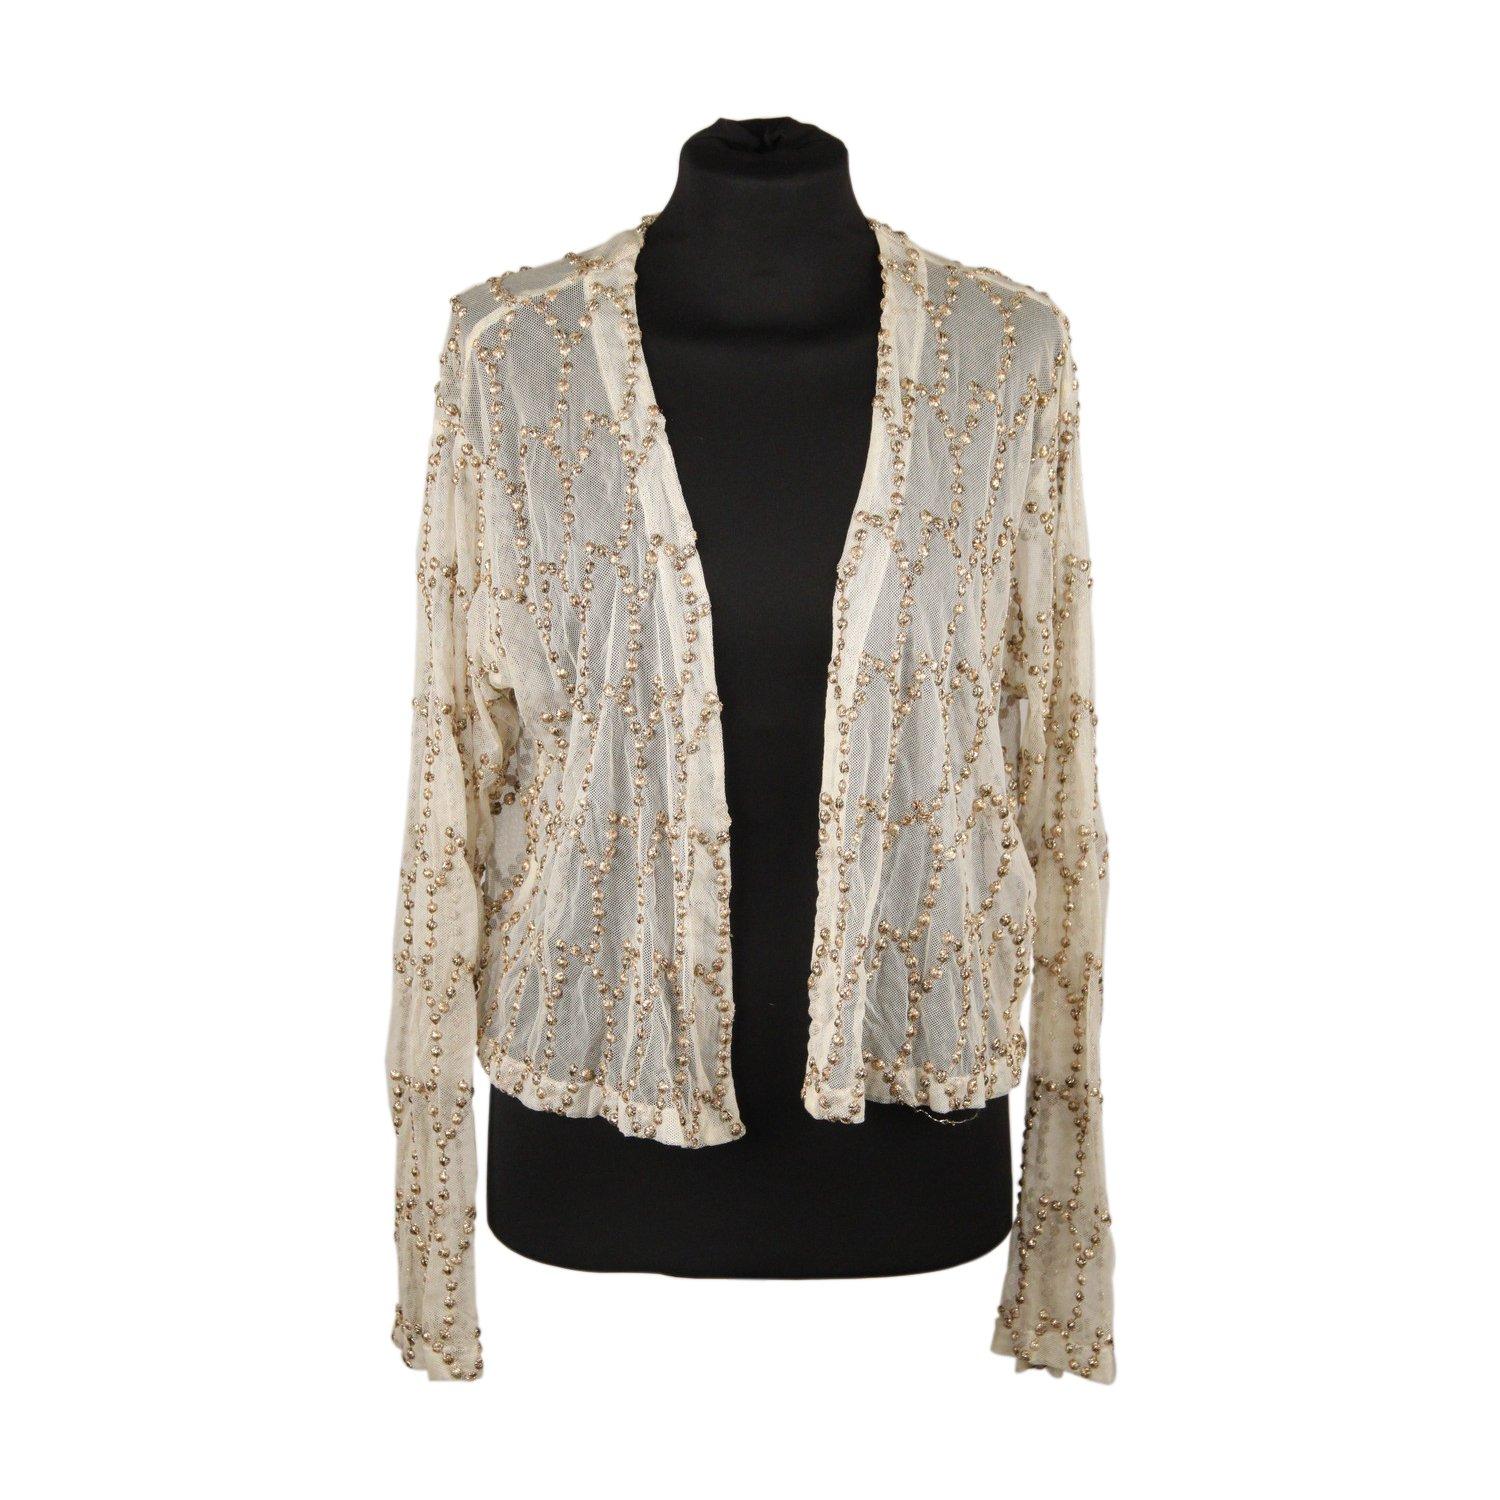 MATERIAL: Mesh COLOR: Beige MODEL: Open Front Jacket GENDER: Women SIZE: Small CONDITION RATING: B :GOOD CONDITION - Some light wear of use CONDITION DETAILS: Gently used MEASUREMENTS: SHOULDER TO SHOULDER: BUST: 17 inches - 43,2 cm (flat - From